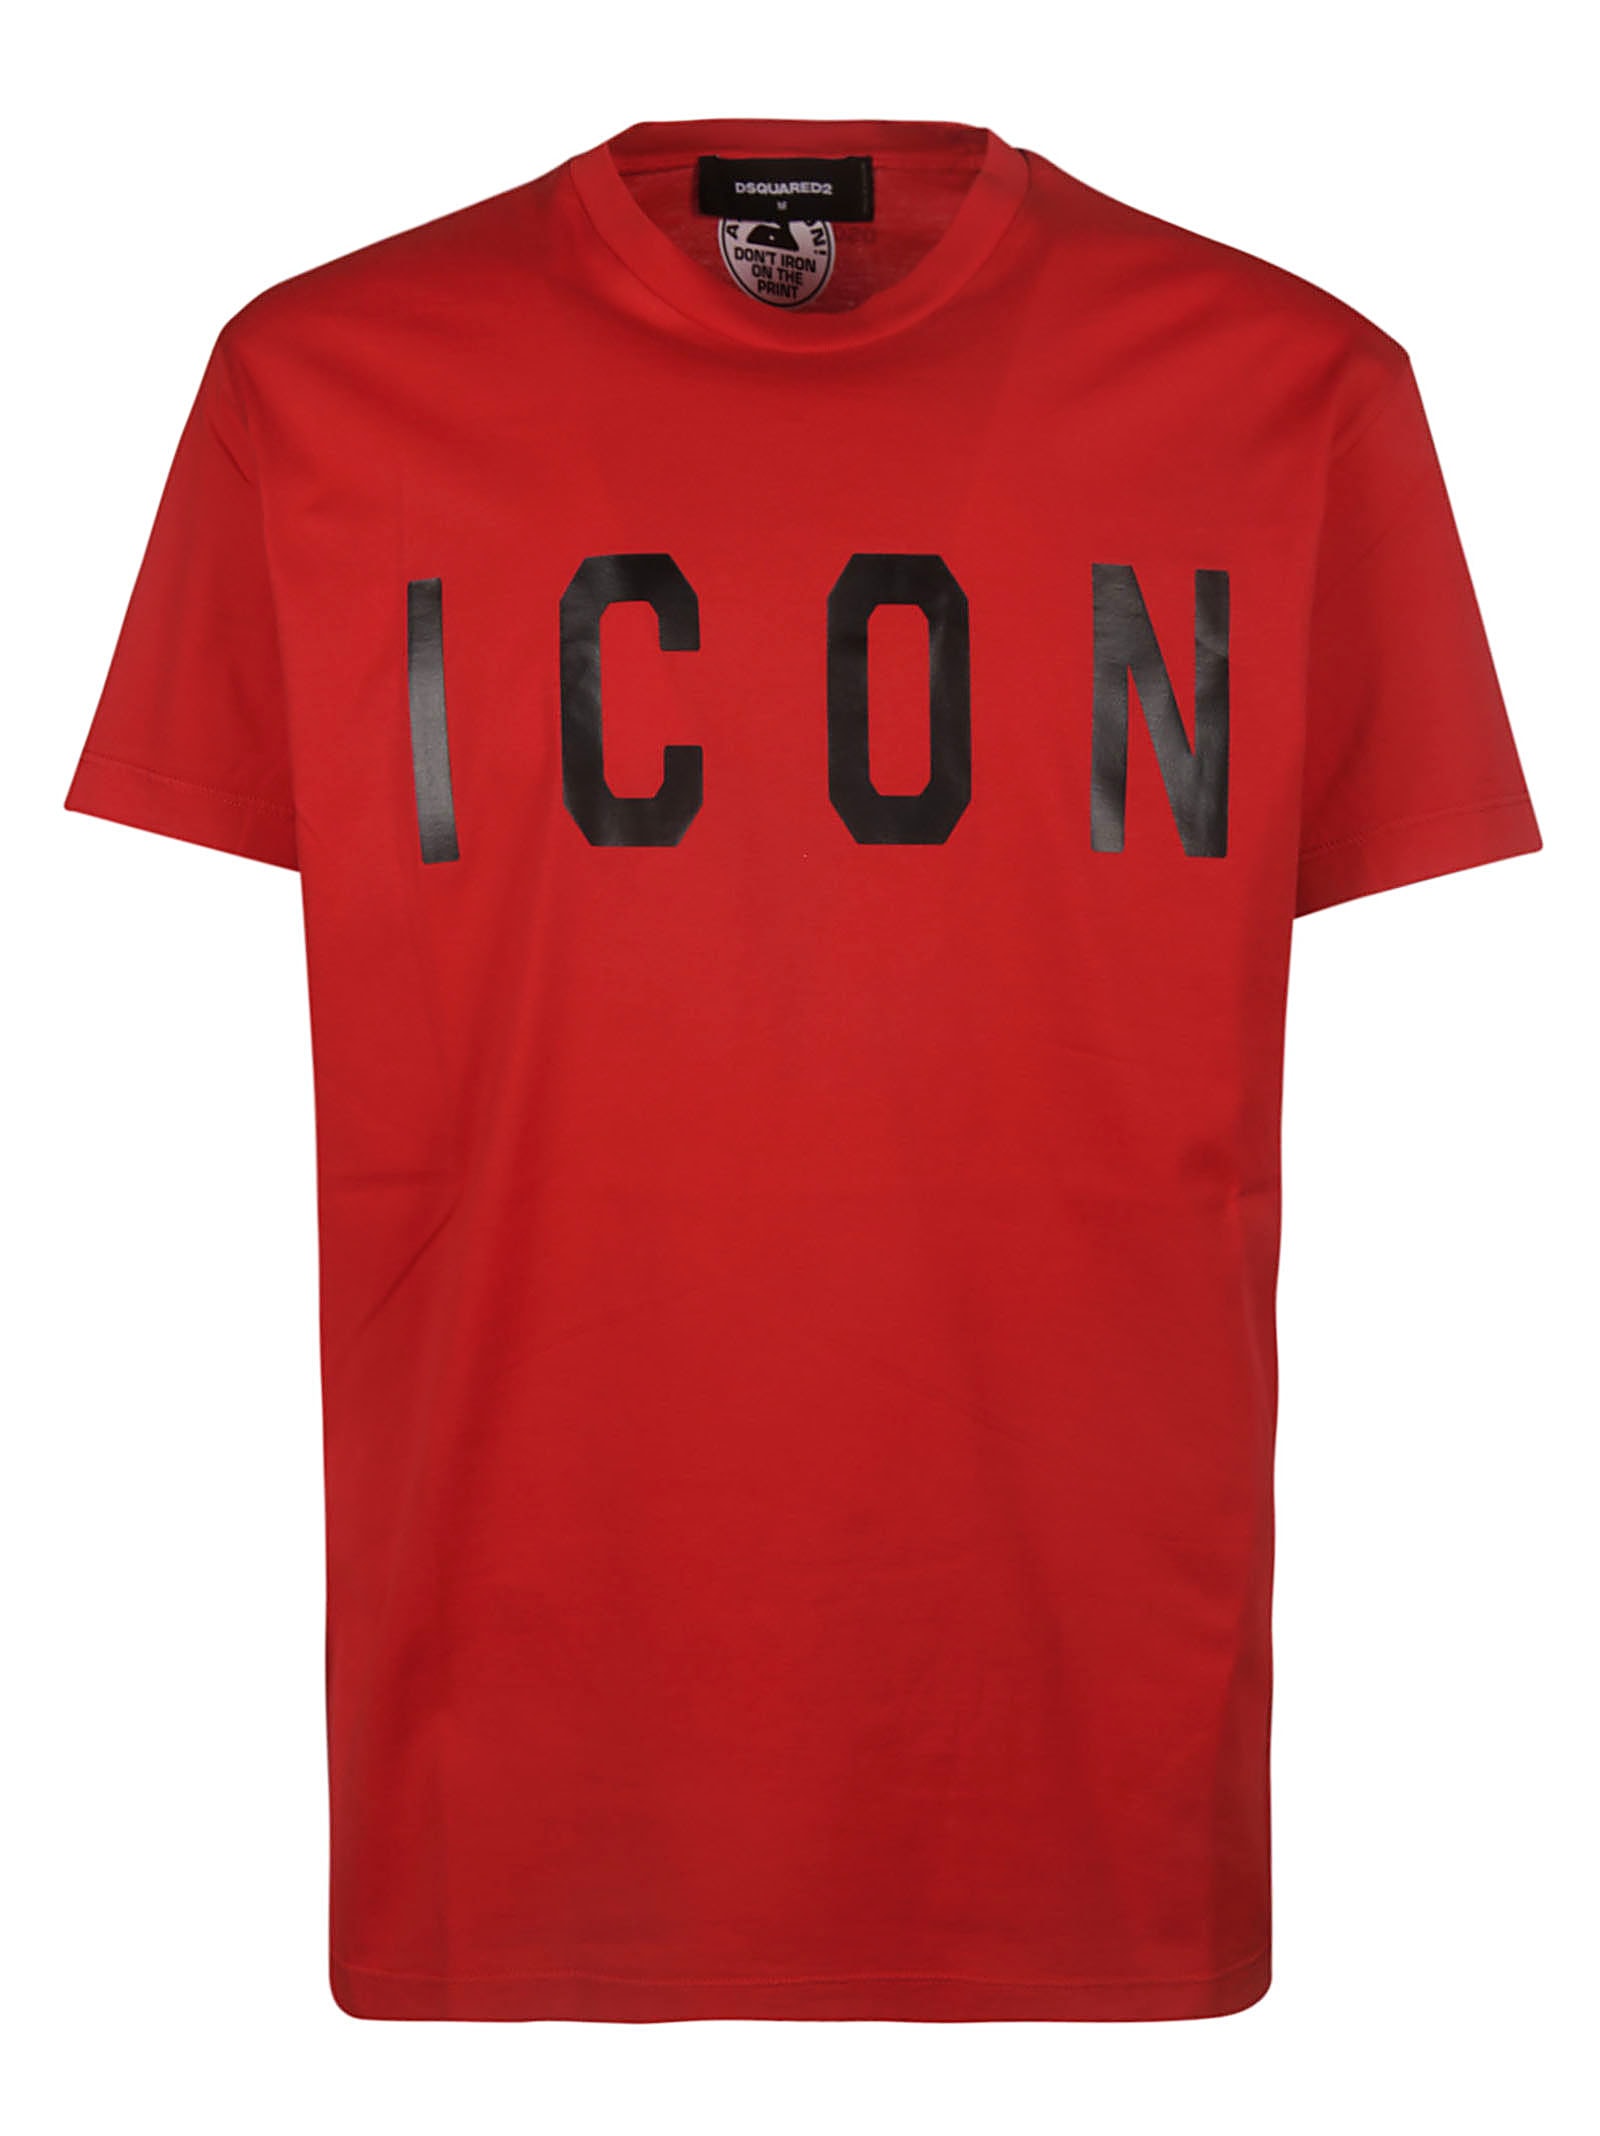 dsquared2 black and red t shirt